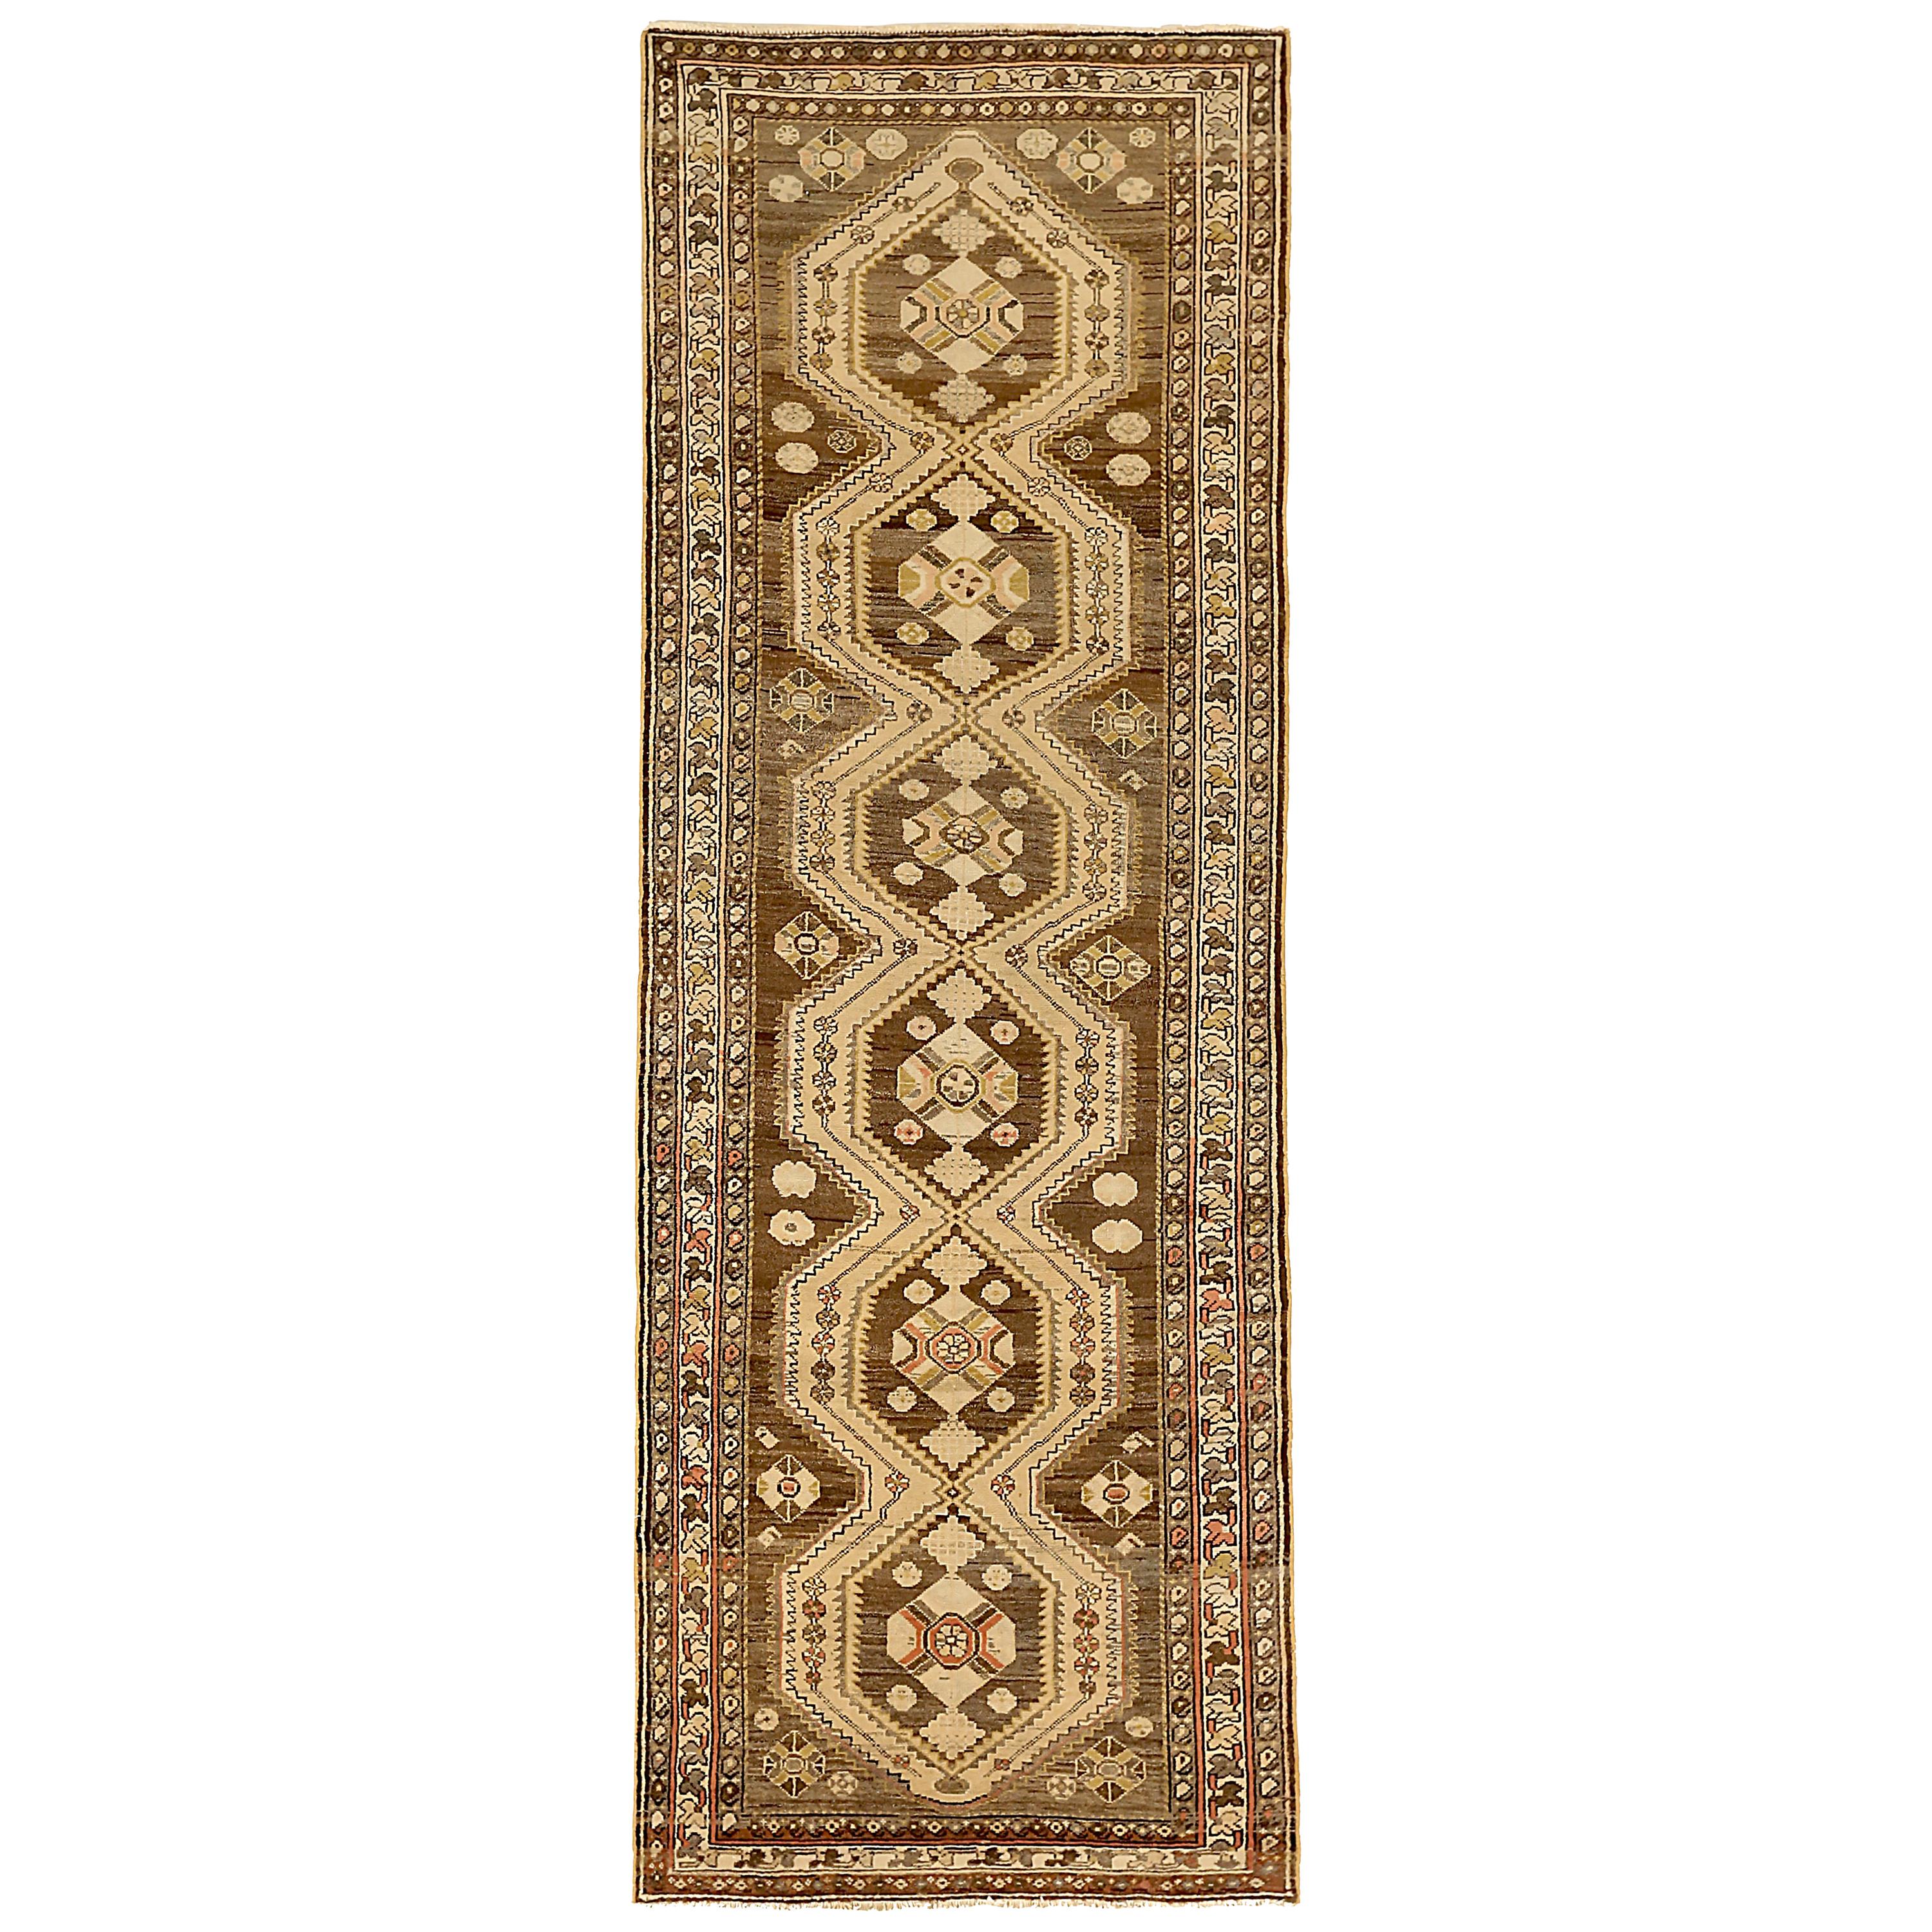 Antique Persian Malayer Area Rug with Geometric Patterns in Brown Field For Sale